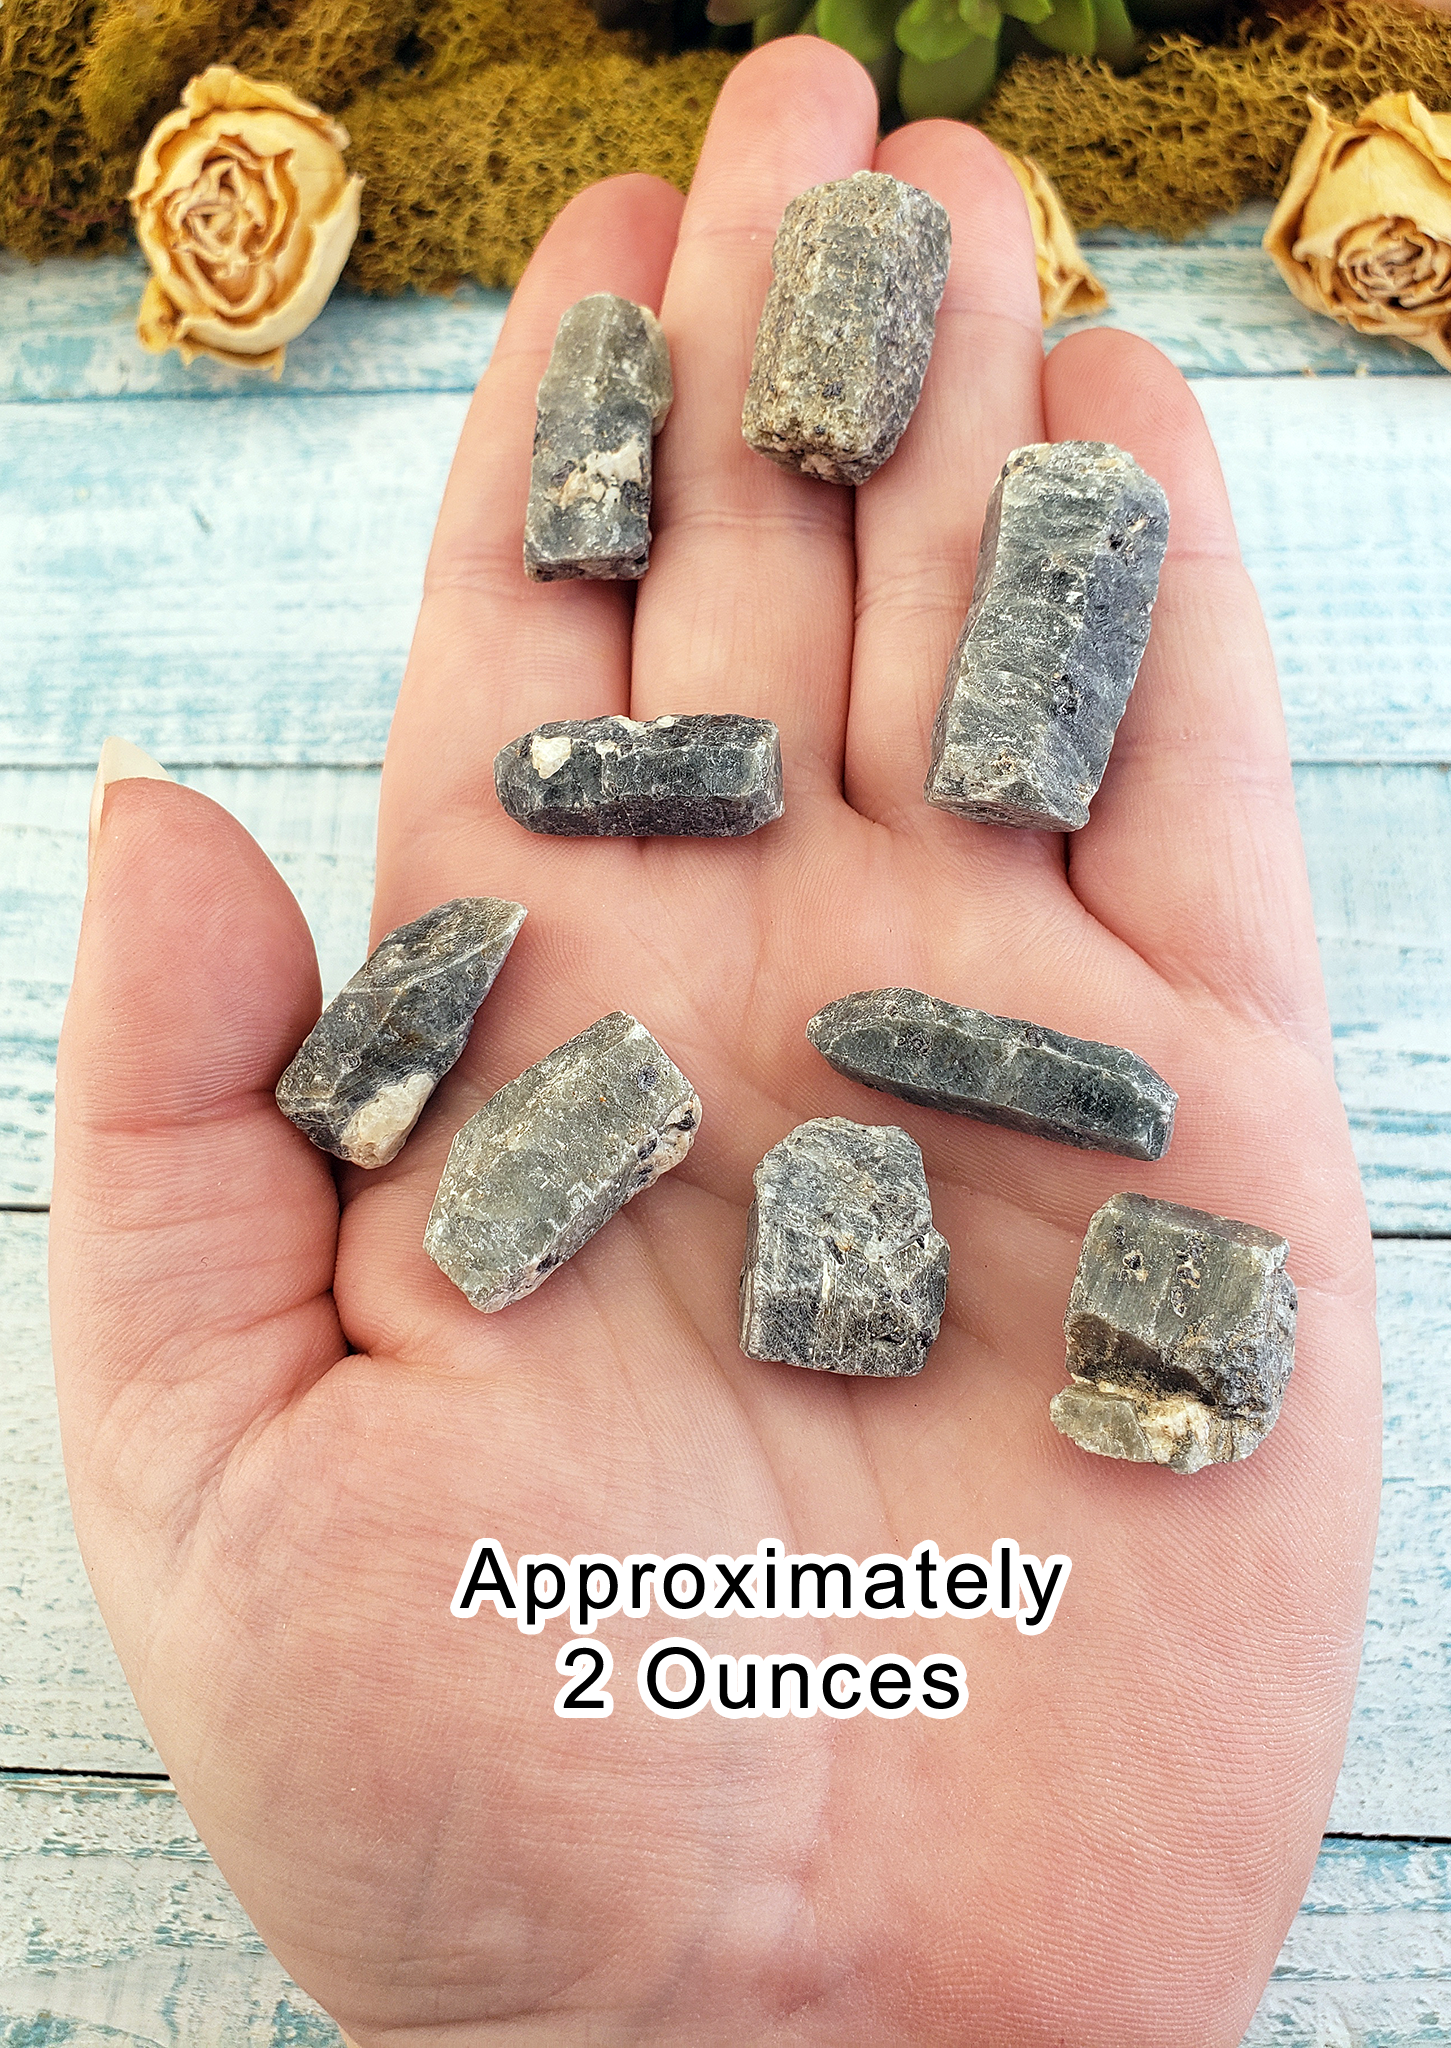 Raw Sapphire Natural Gemstone Small - One Stone or Bulk Wholesale Lots - 2 Ounces in Hand